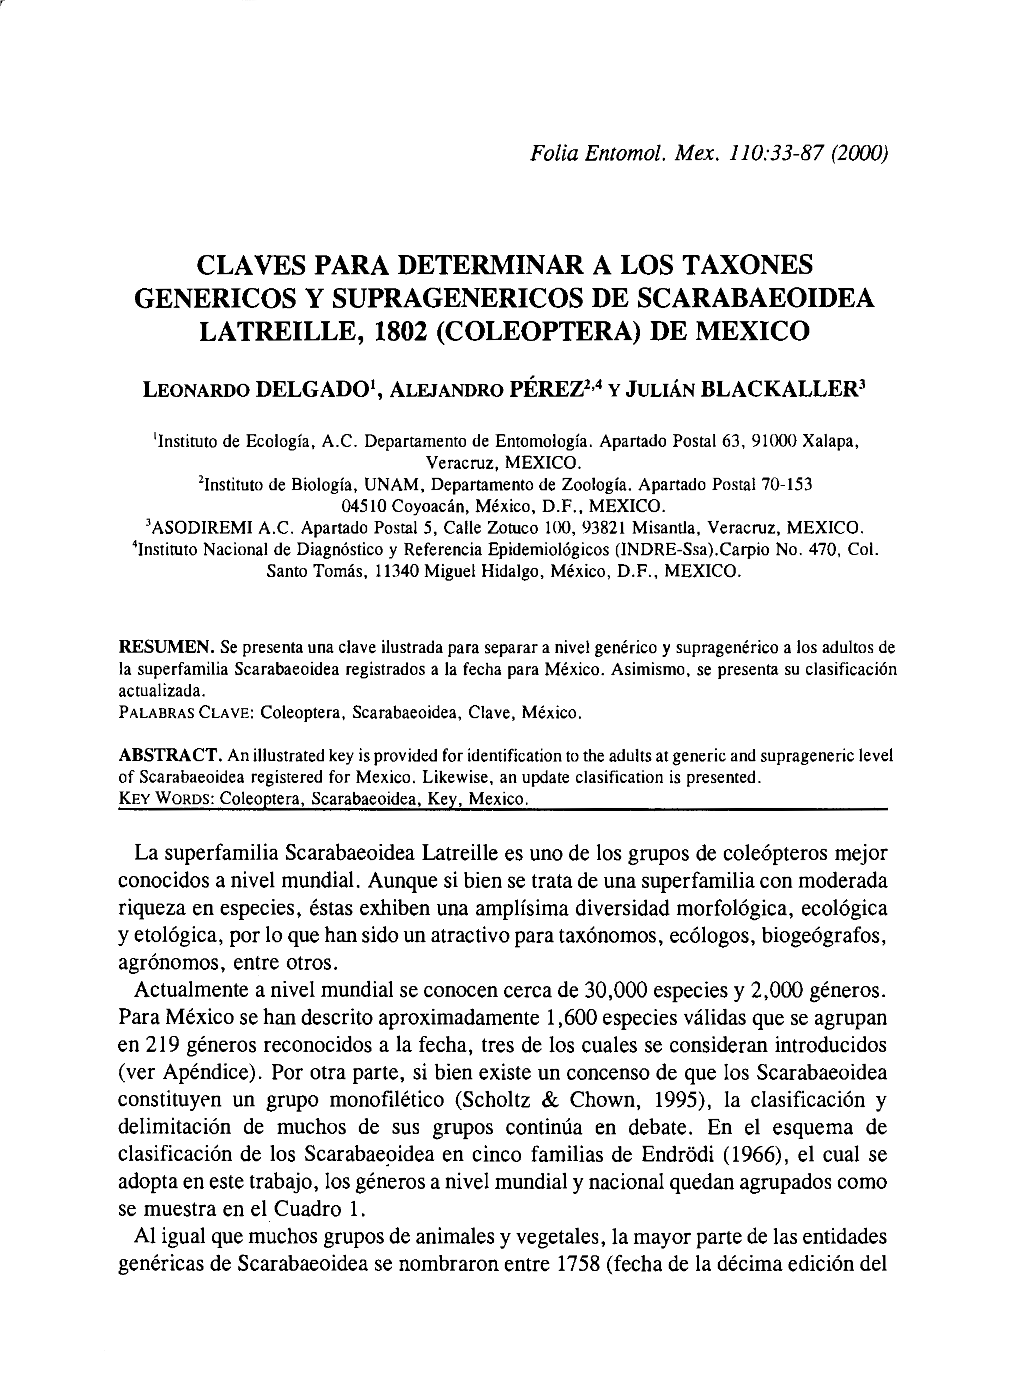 COLEOPTERA) DE MEXICO to Effectiveness of Topically Applied